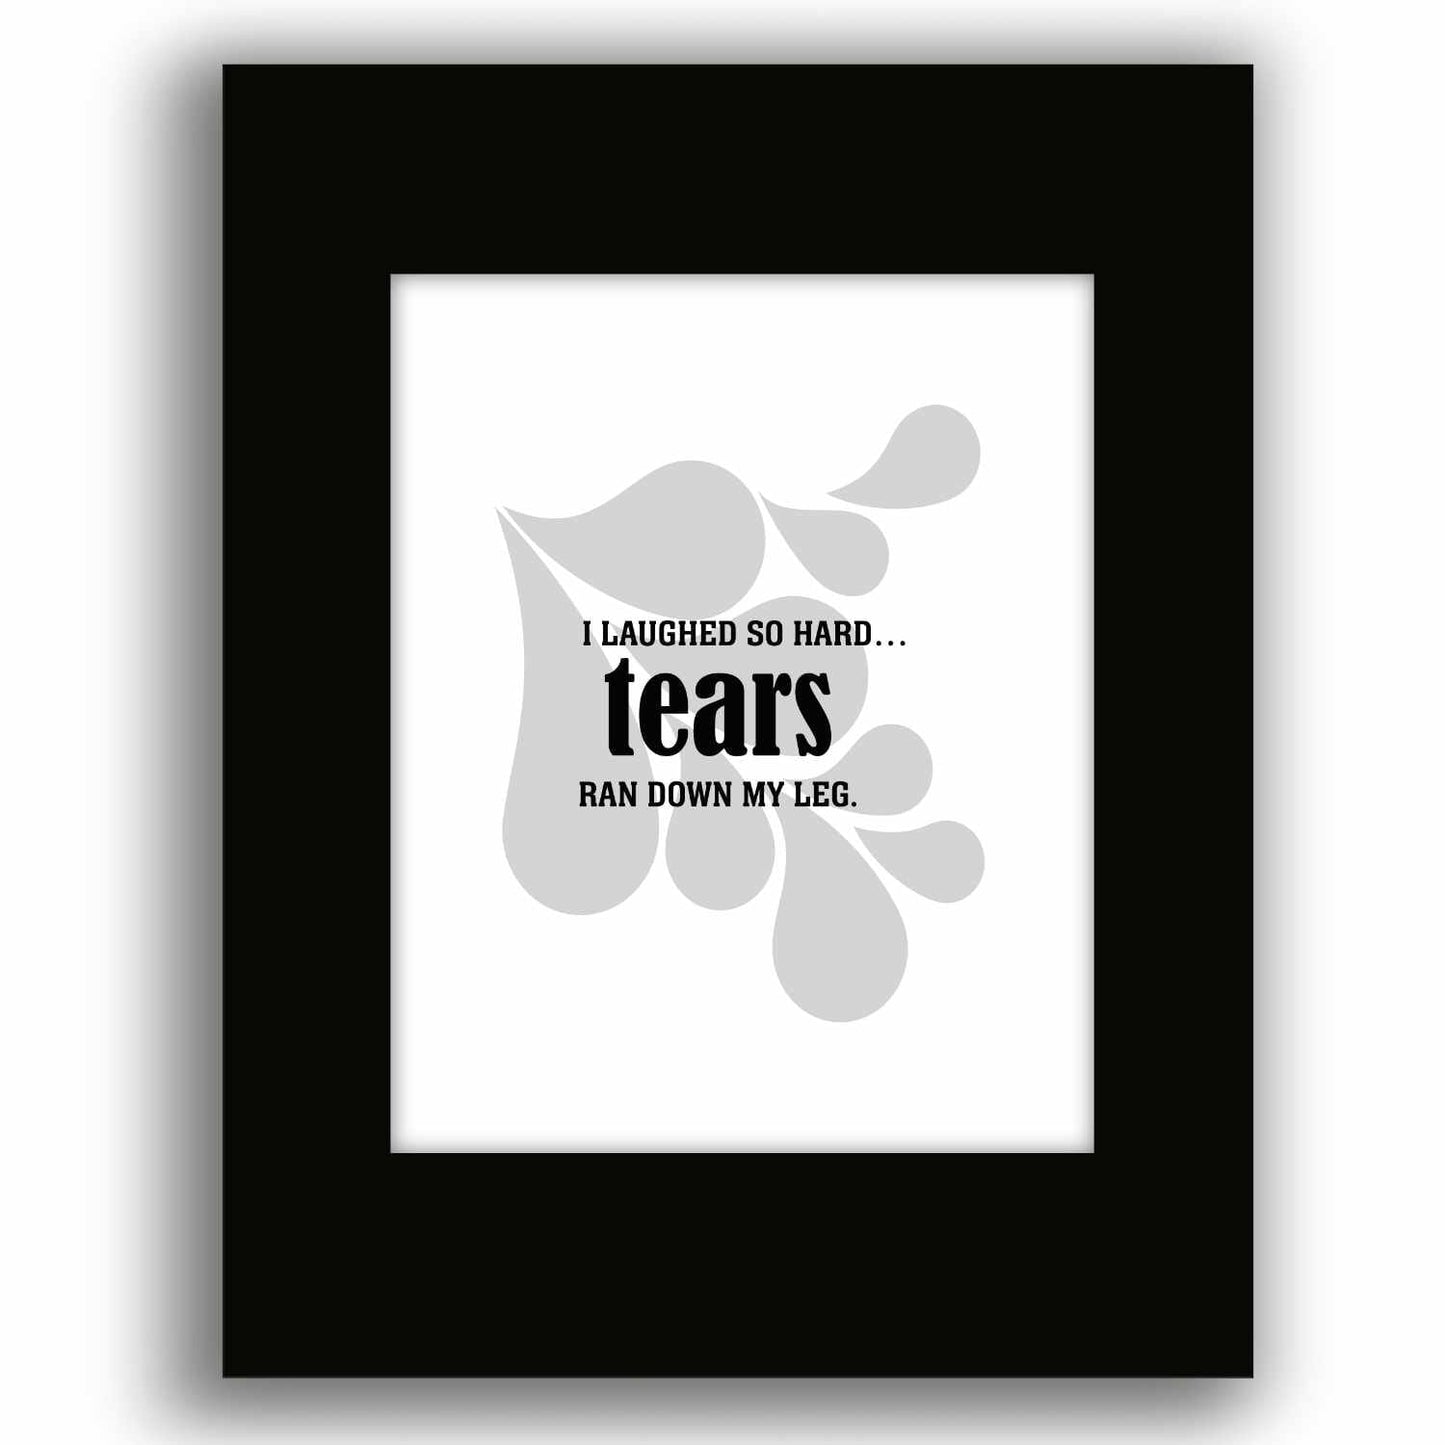 Wise and Witty Art - I Laughed So Hard Tears Ran Down My Leg Wise and Wiseass Quotes Song Lyrics Art 8x10 Black Matted Print 